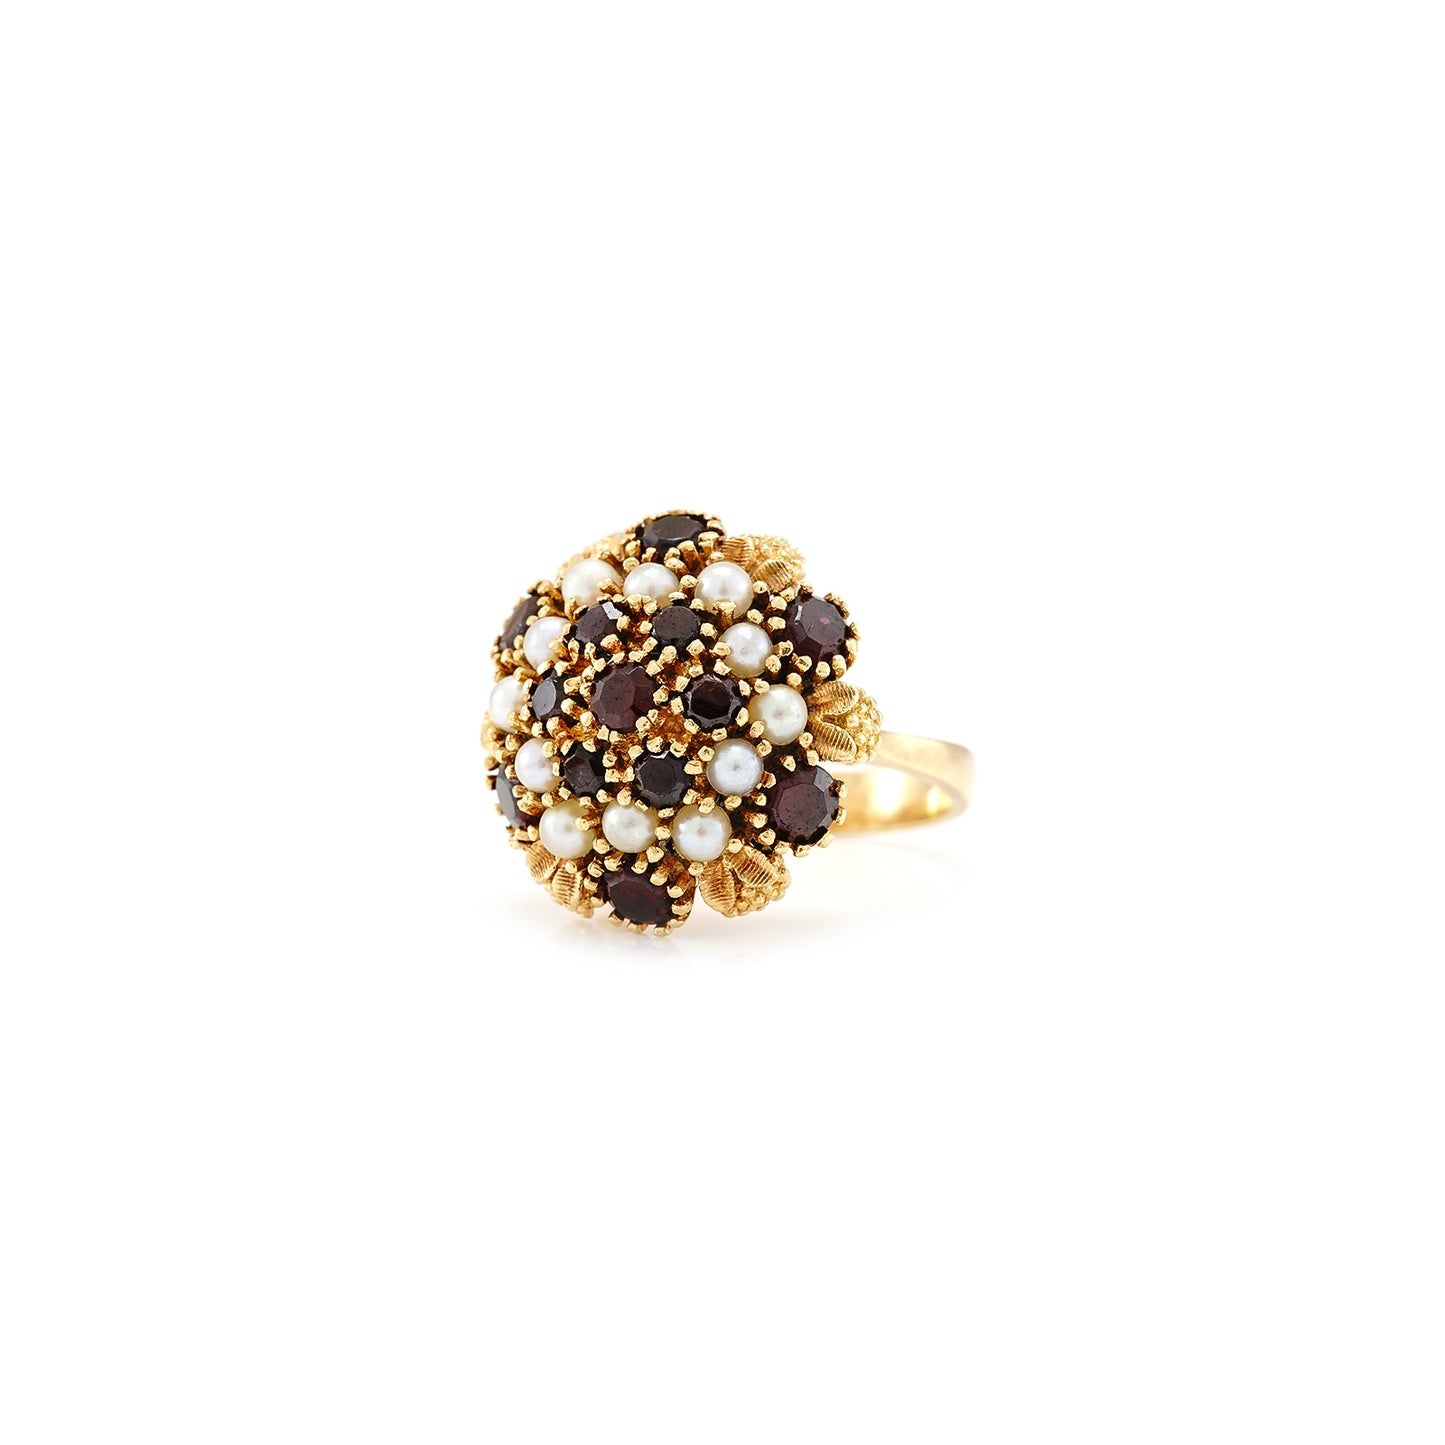 Vintage women's ring ostrich garnet pearl yellow gold 750 18K RW56 women's jewelry gold ring